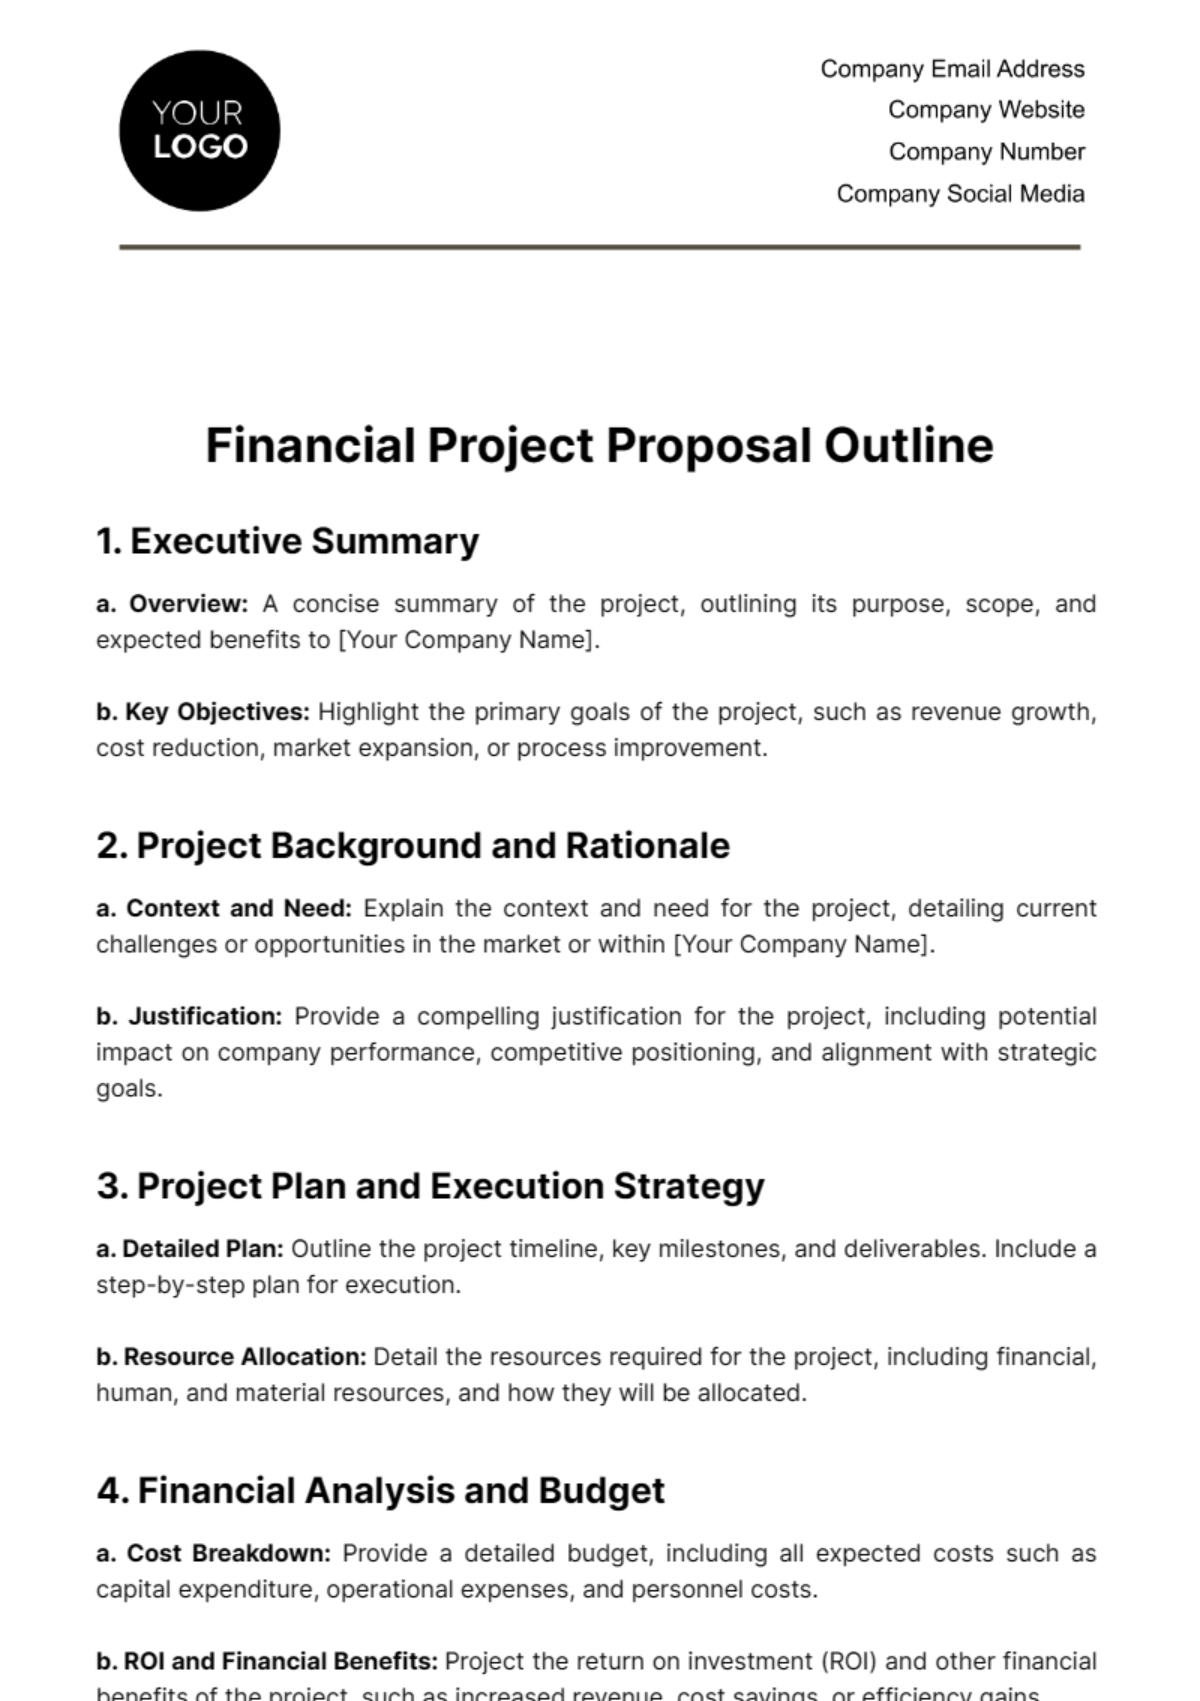 Free Financial Project Proposal Outline Template